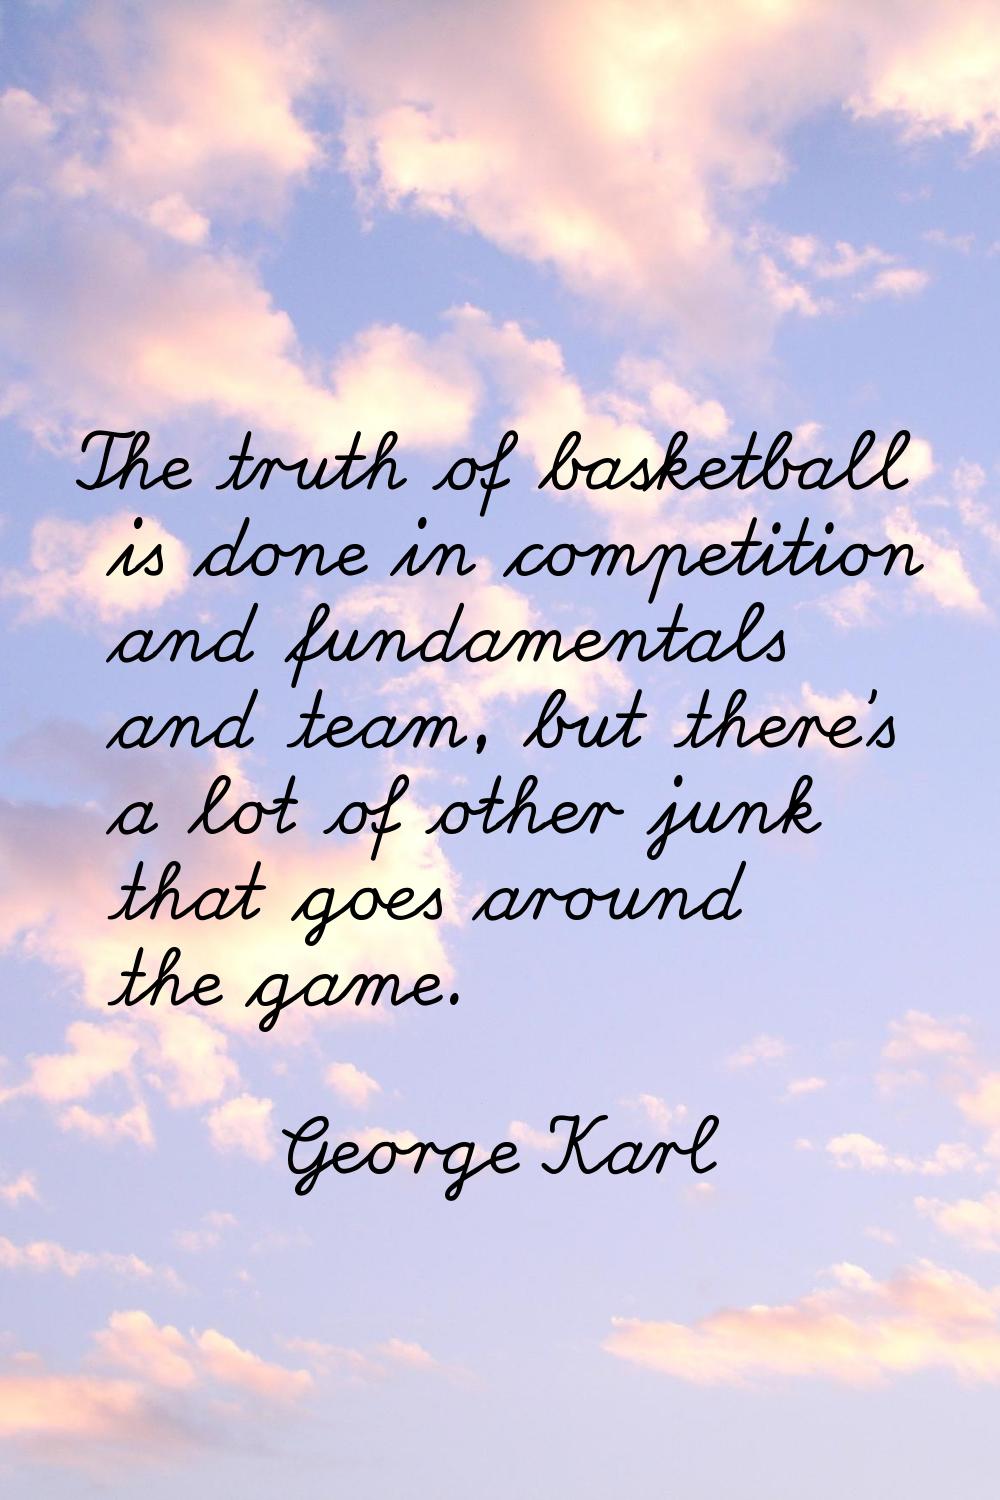 The truth of basketball is done in competition and fundamentals and team, but there's a lot of othe